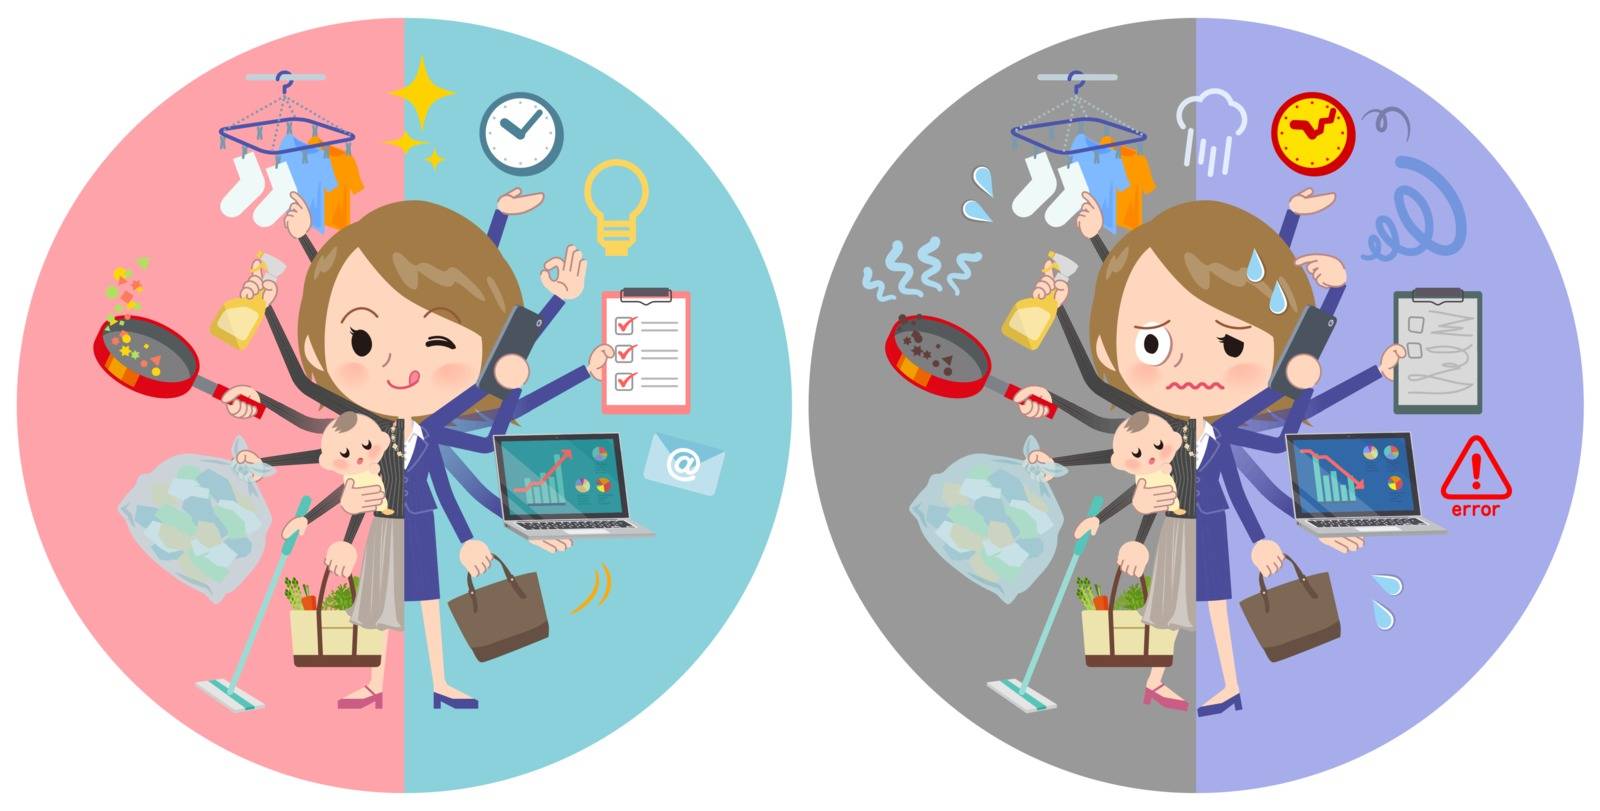 A set of women who perform multitasking in offices and private.
There are things to do smoothly and a pattern that is in a panic.
It's vector art so it's easy to edit.